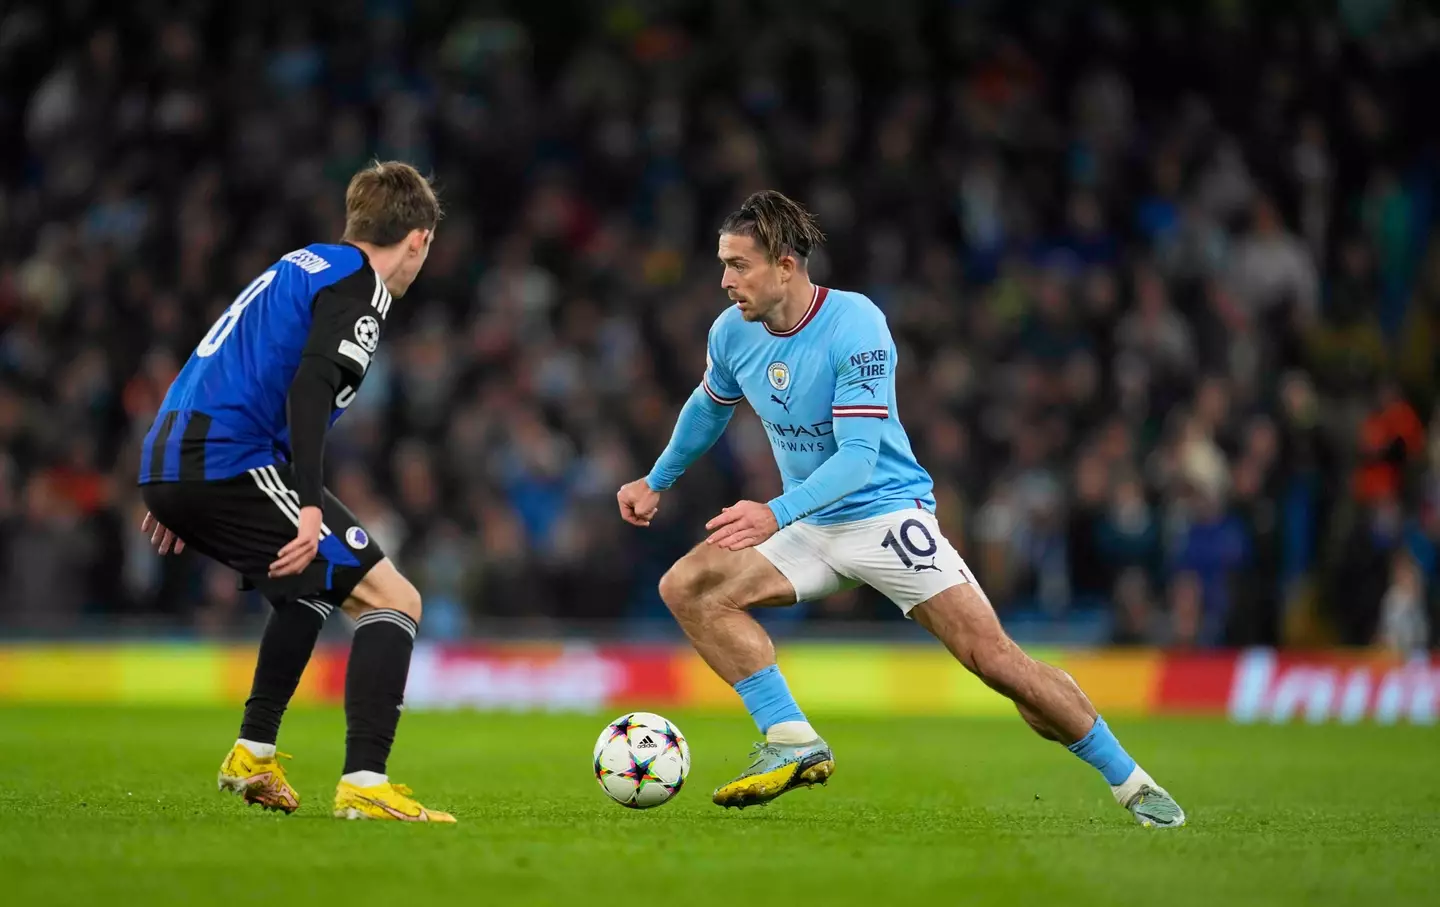 Grealish in action against FC Copenhagen in the Champions League earlier this month. (Image